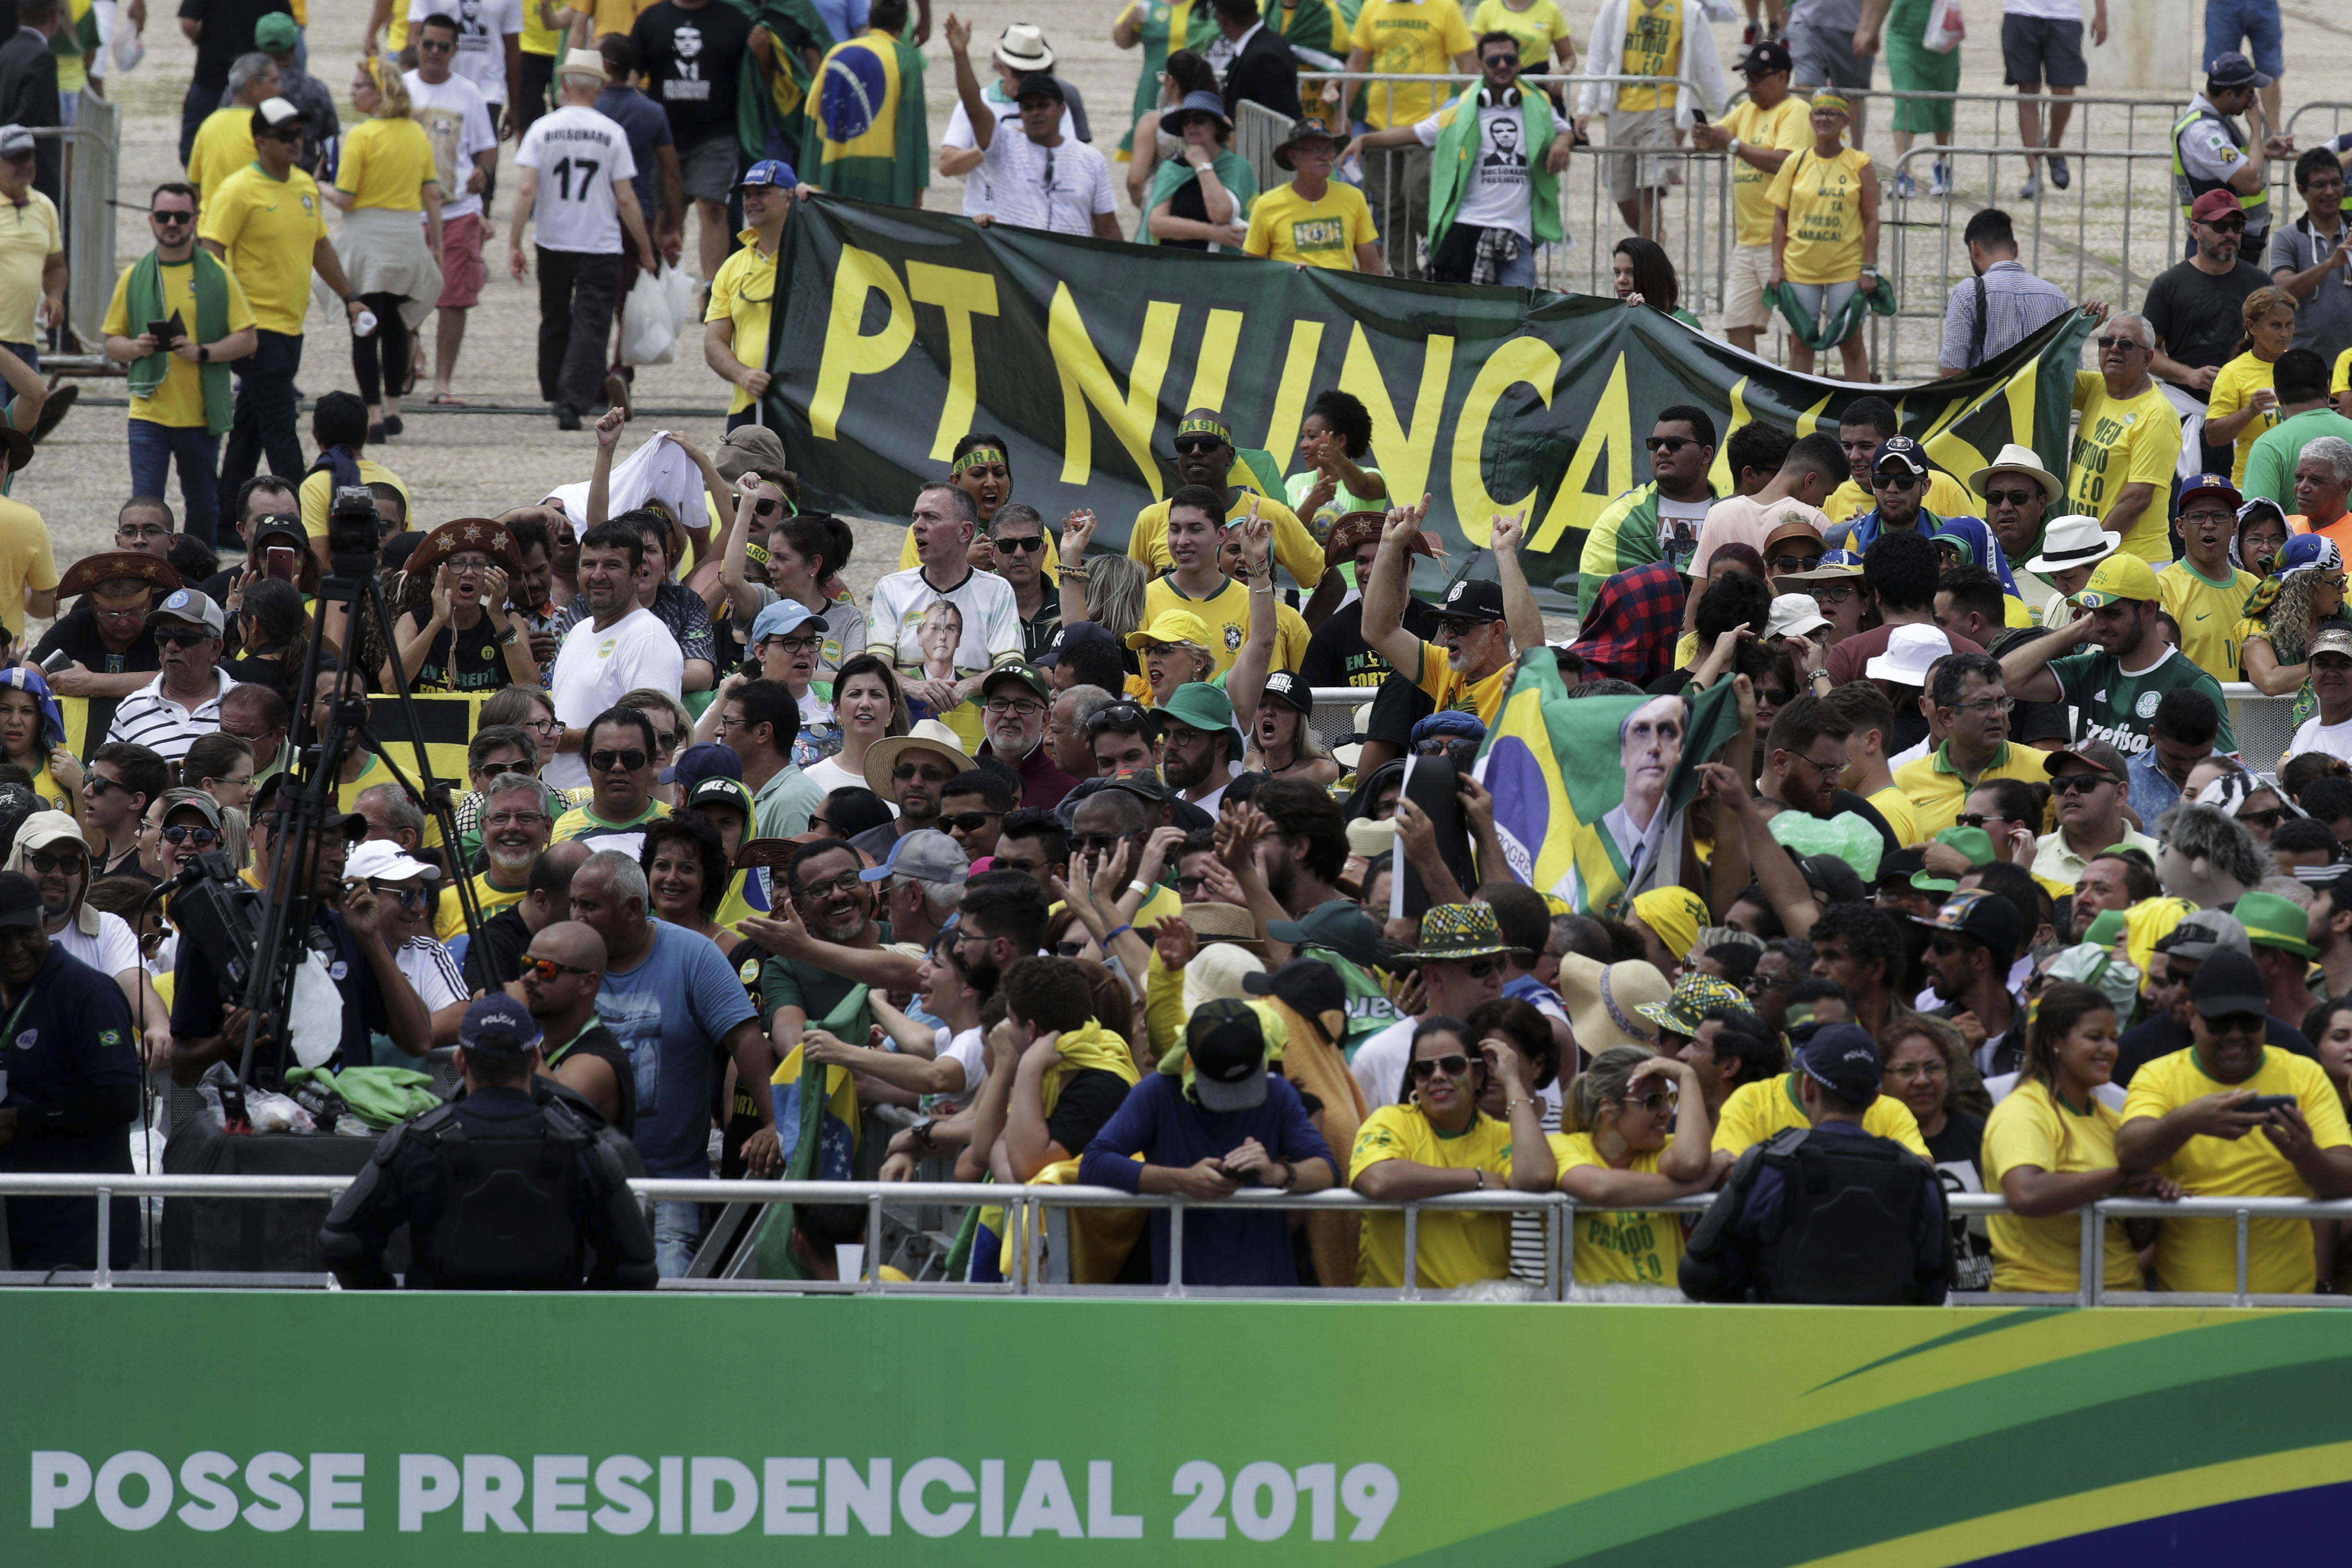 Supporters of Brazil's President Jair Bolsonaro hold a banner in the stands that reads in Portuguese 